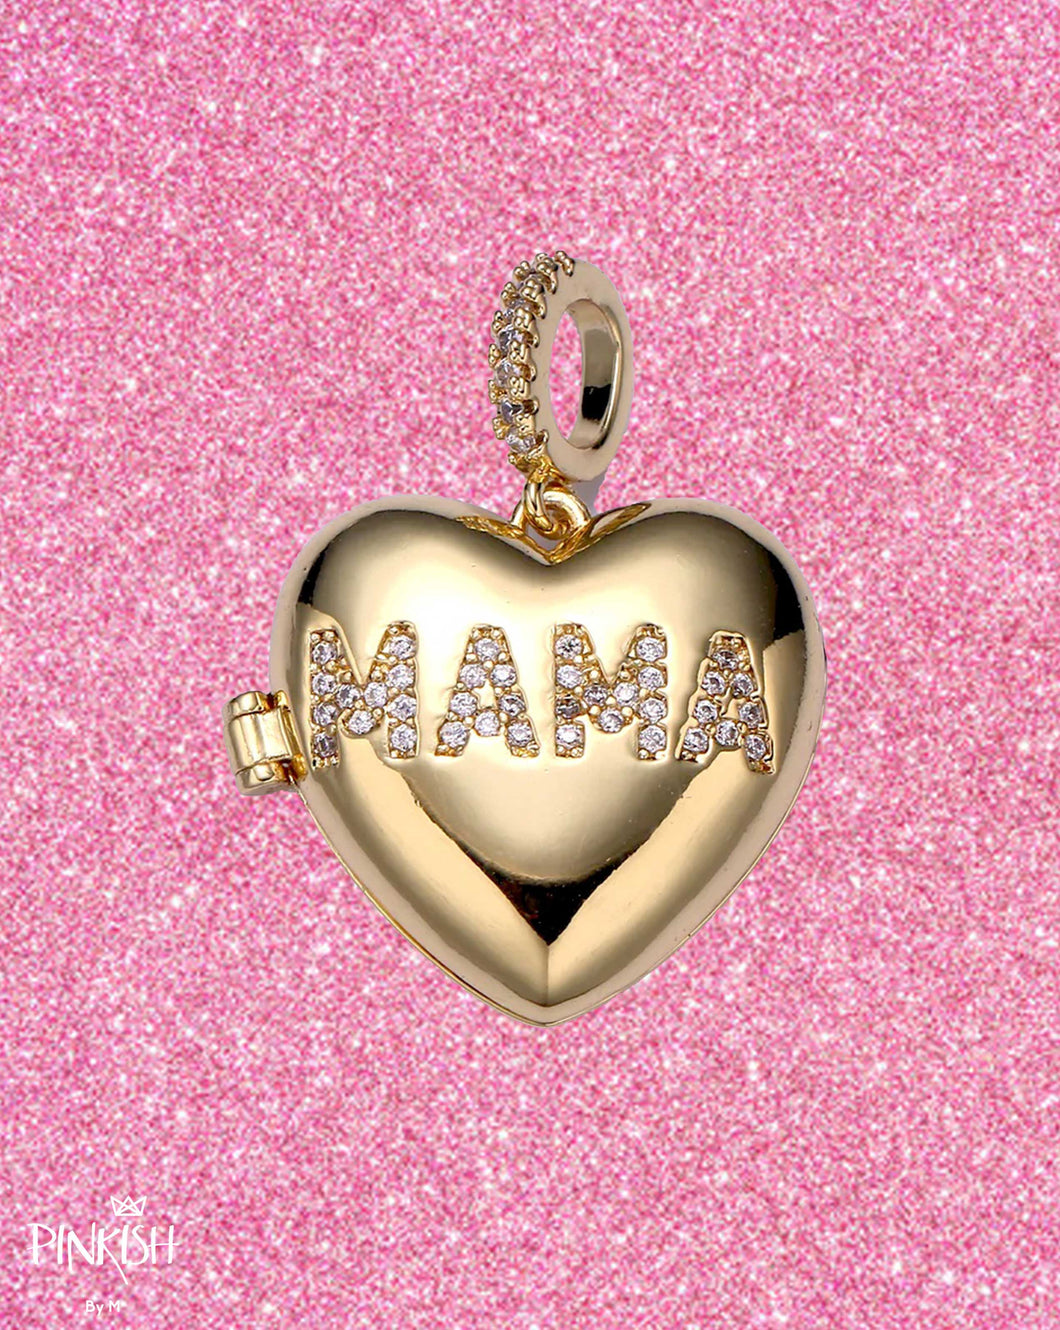 Mama gold heart locket pendant necklace gift for mom mothers